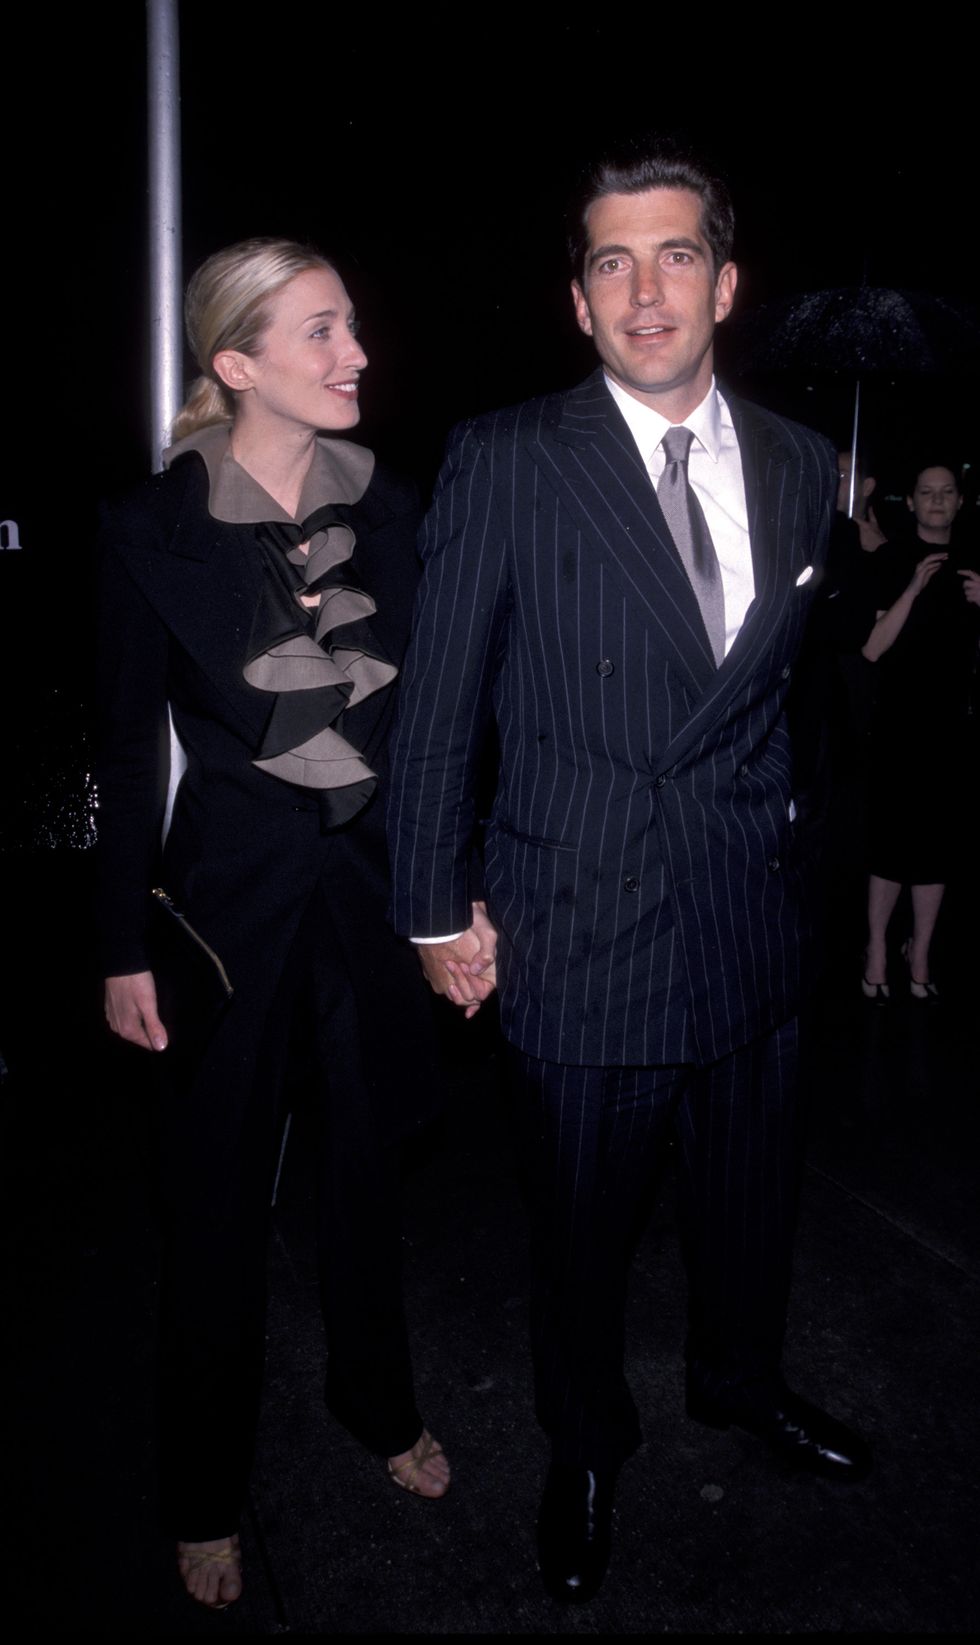 john f kennedy  carolyn bessette during newmans own george awards at us customs house in new york city, new york, united states photo by ron galellaron galella collection via getty images